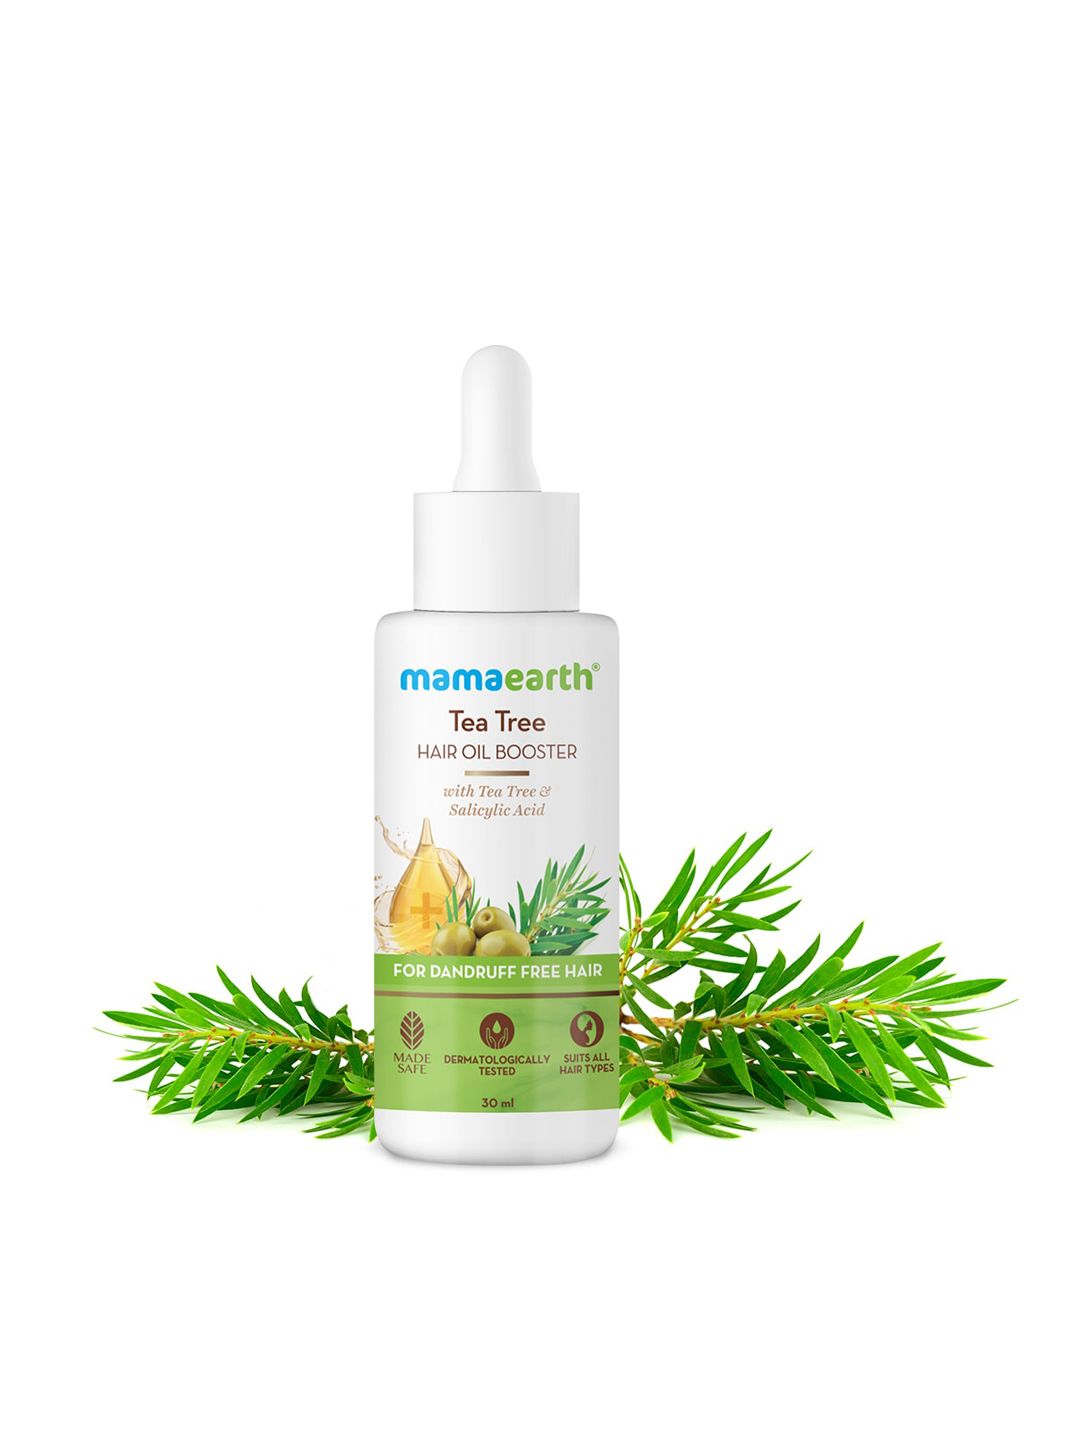 Mamaearth Tea Tree Hair Oil Booster with Salicylic Acid for Dandruff Free Hair - 30ml Price in India